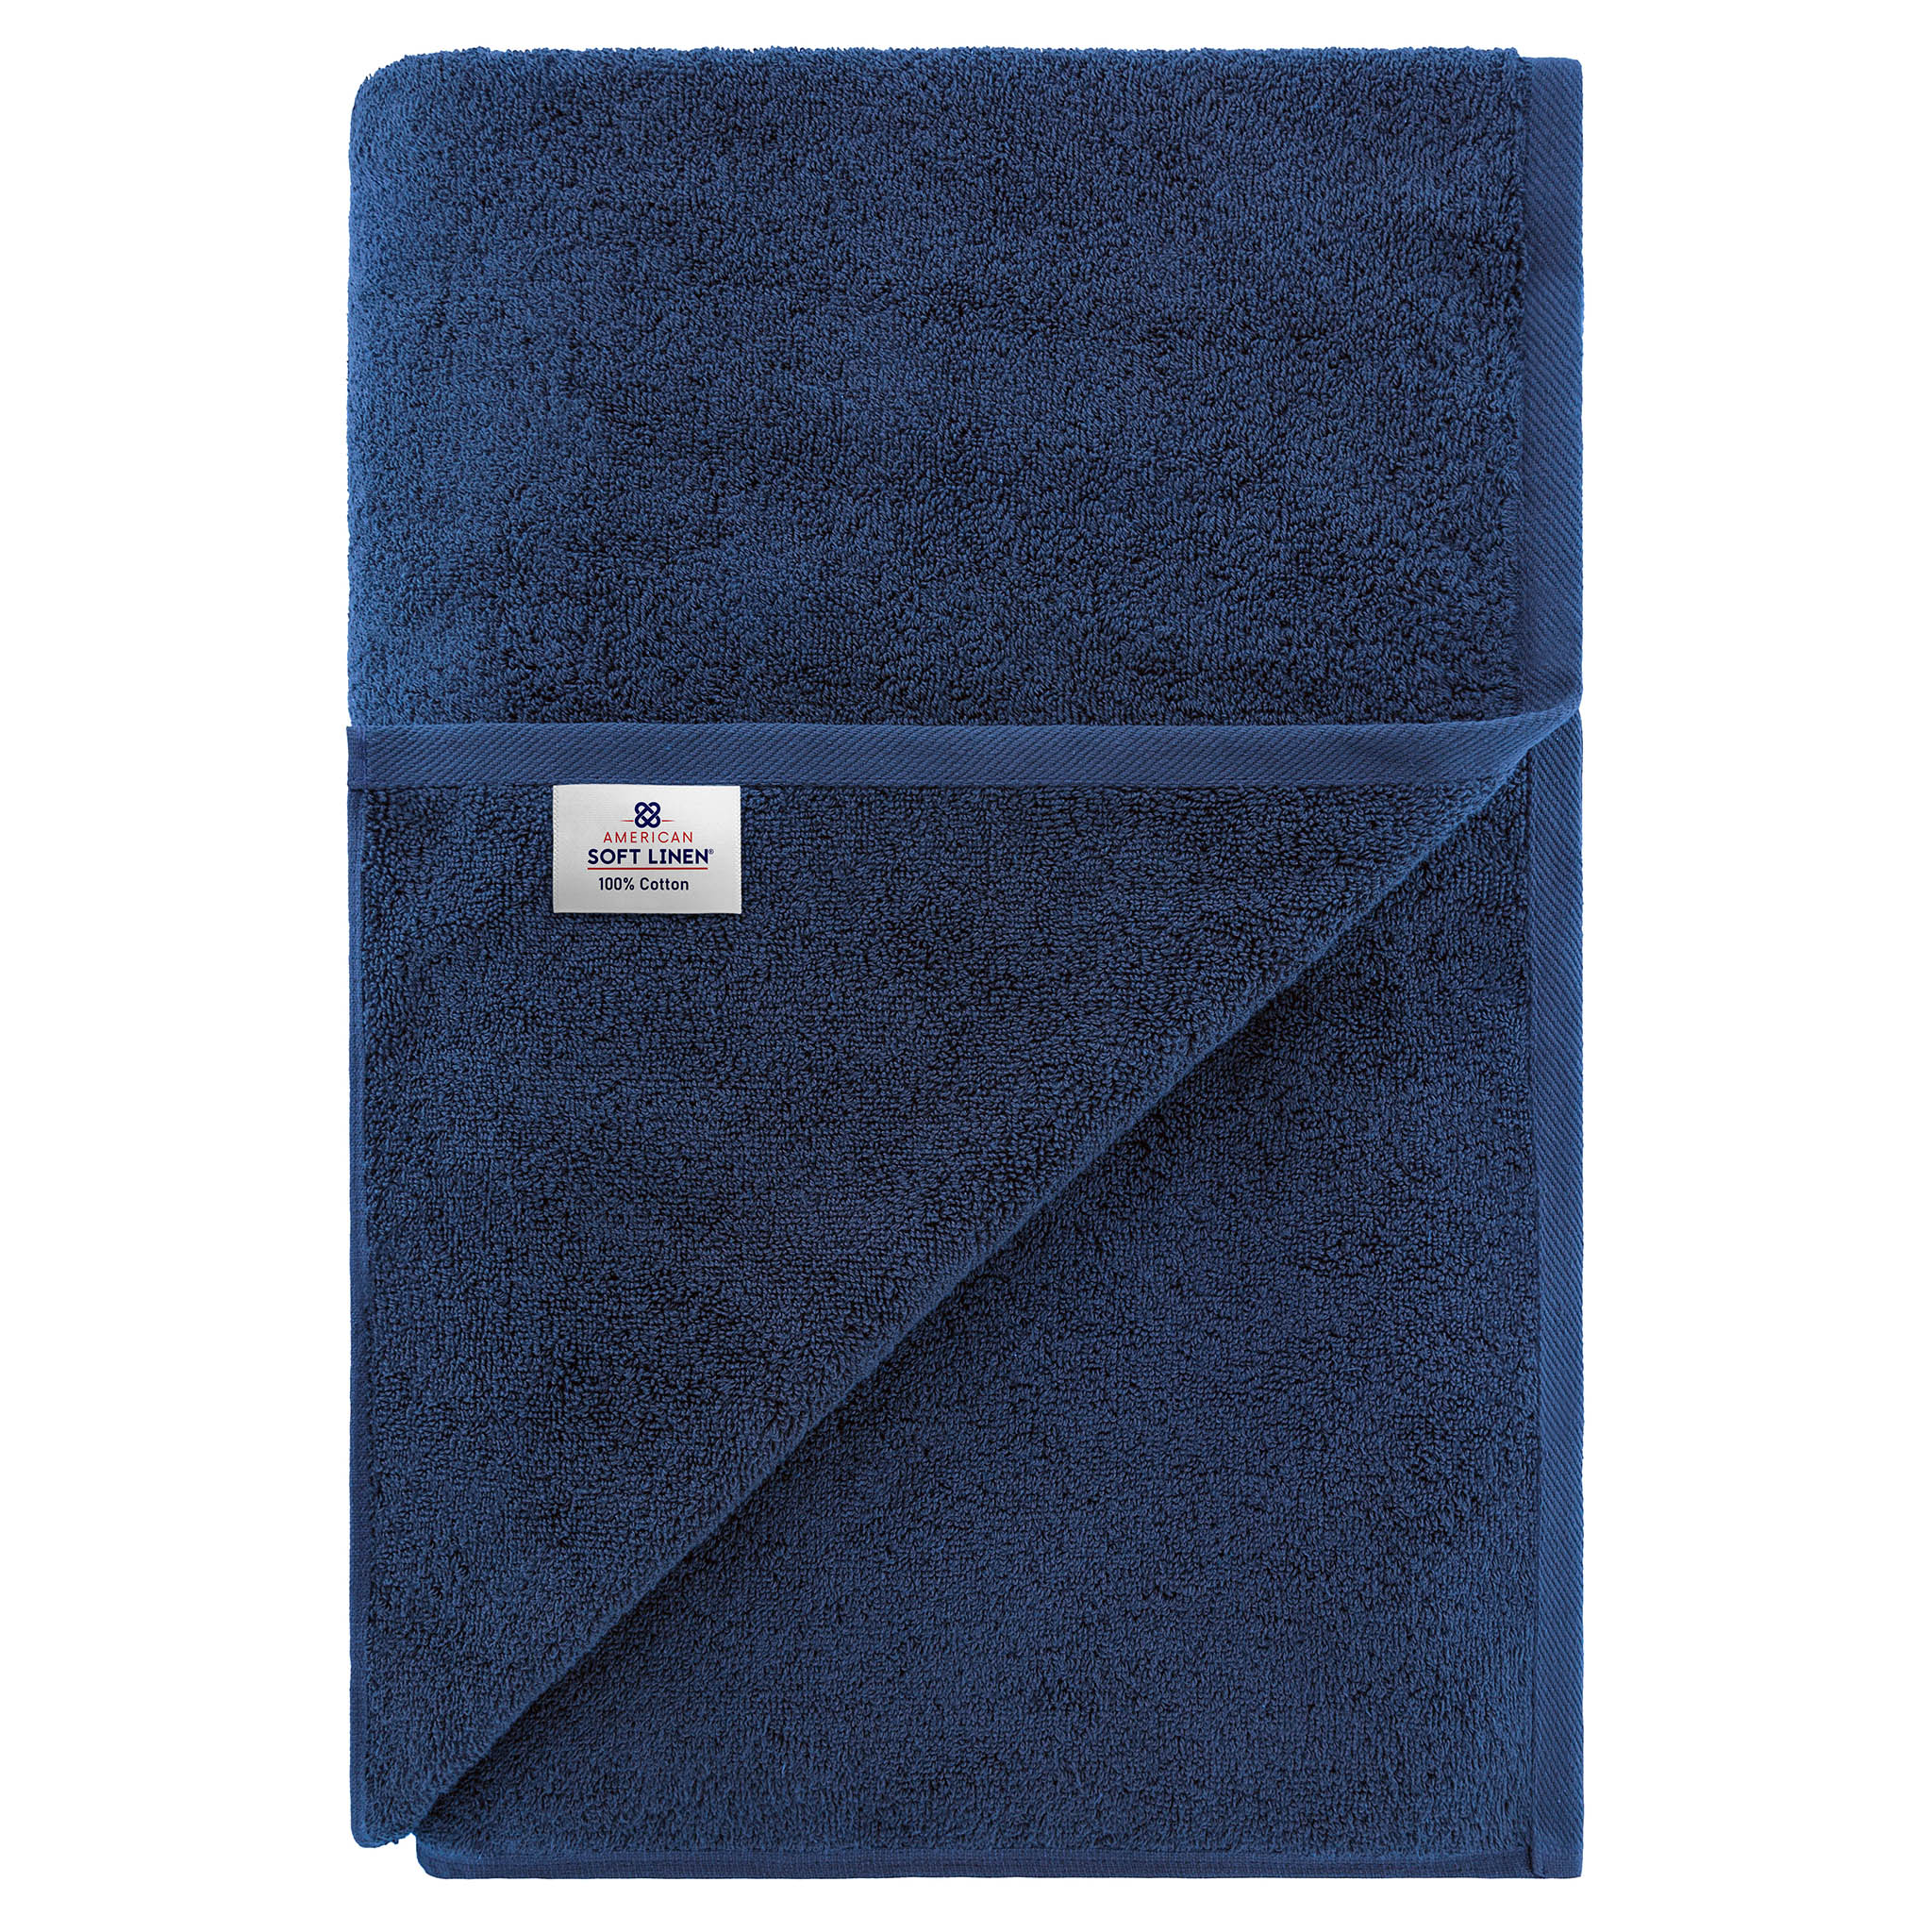 American Soft Linen 100% Ring Spun Cotton 40x80 Inches Oversized Bath Sheets navy-blue-7